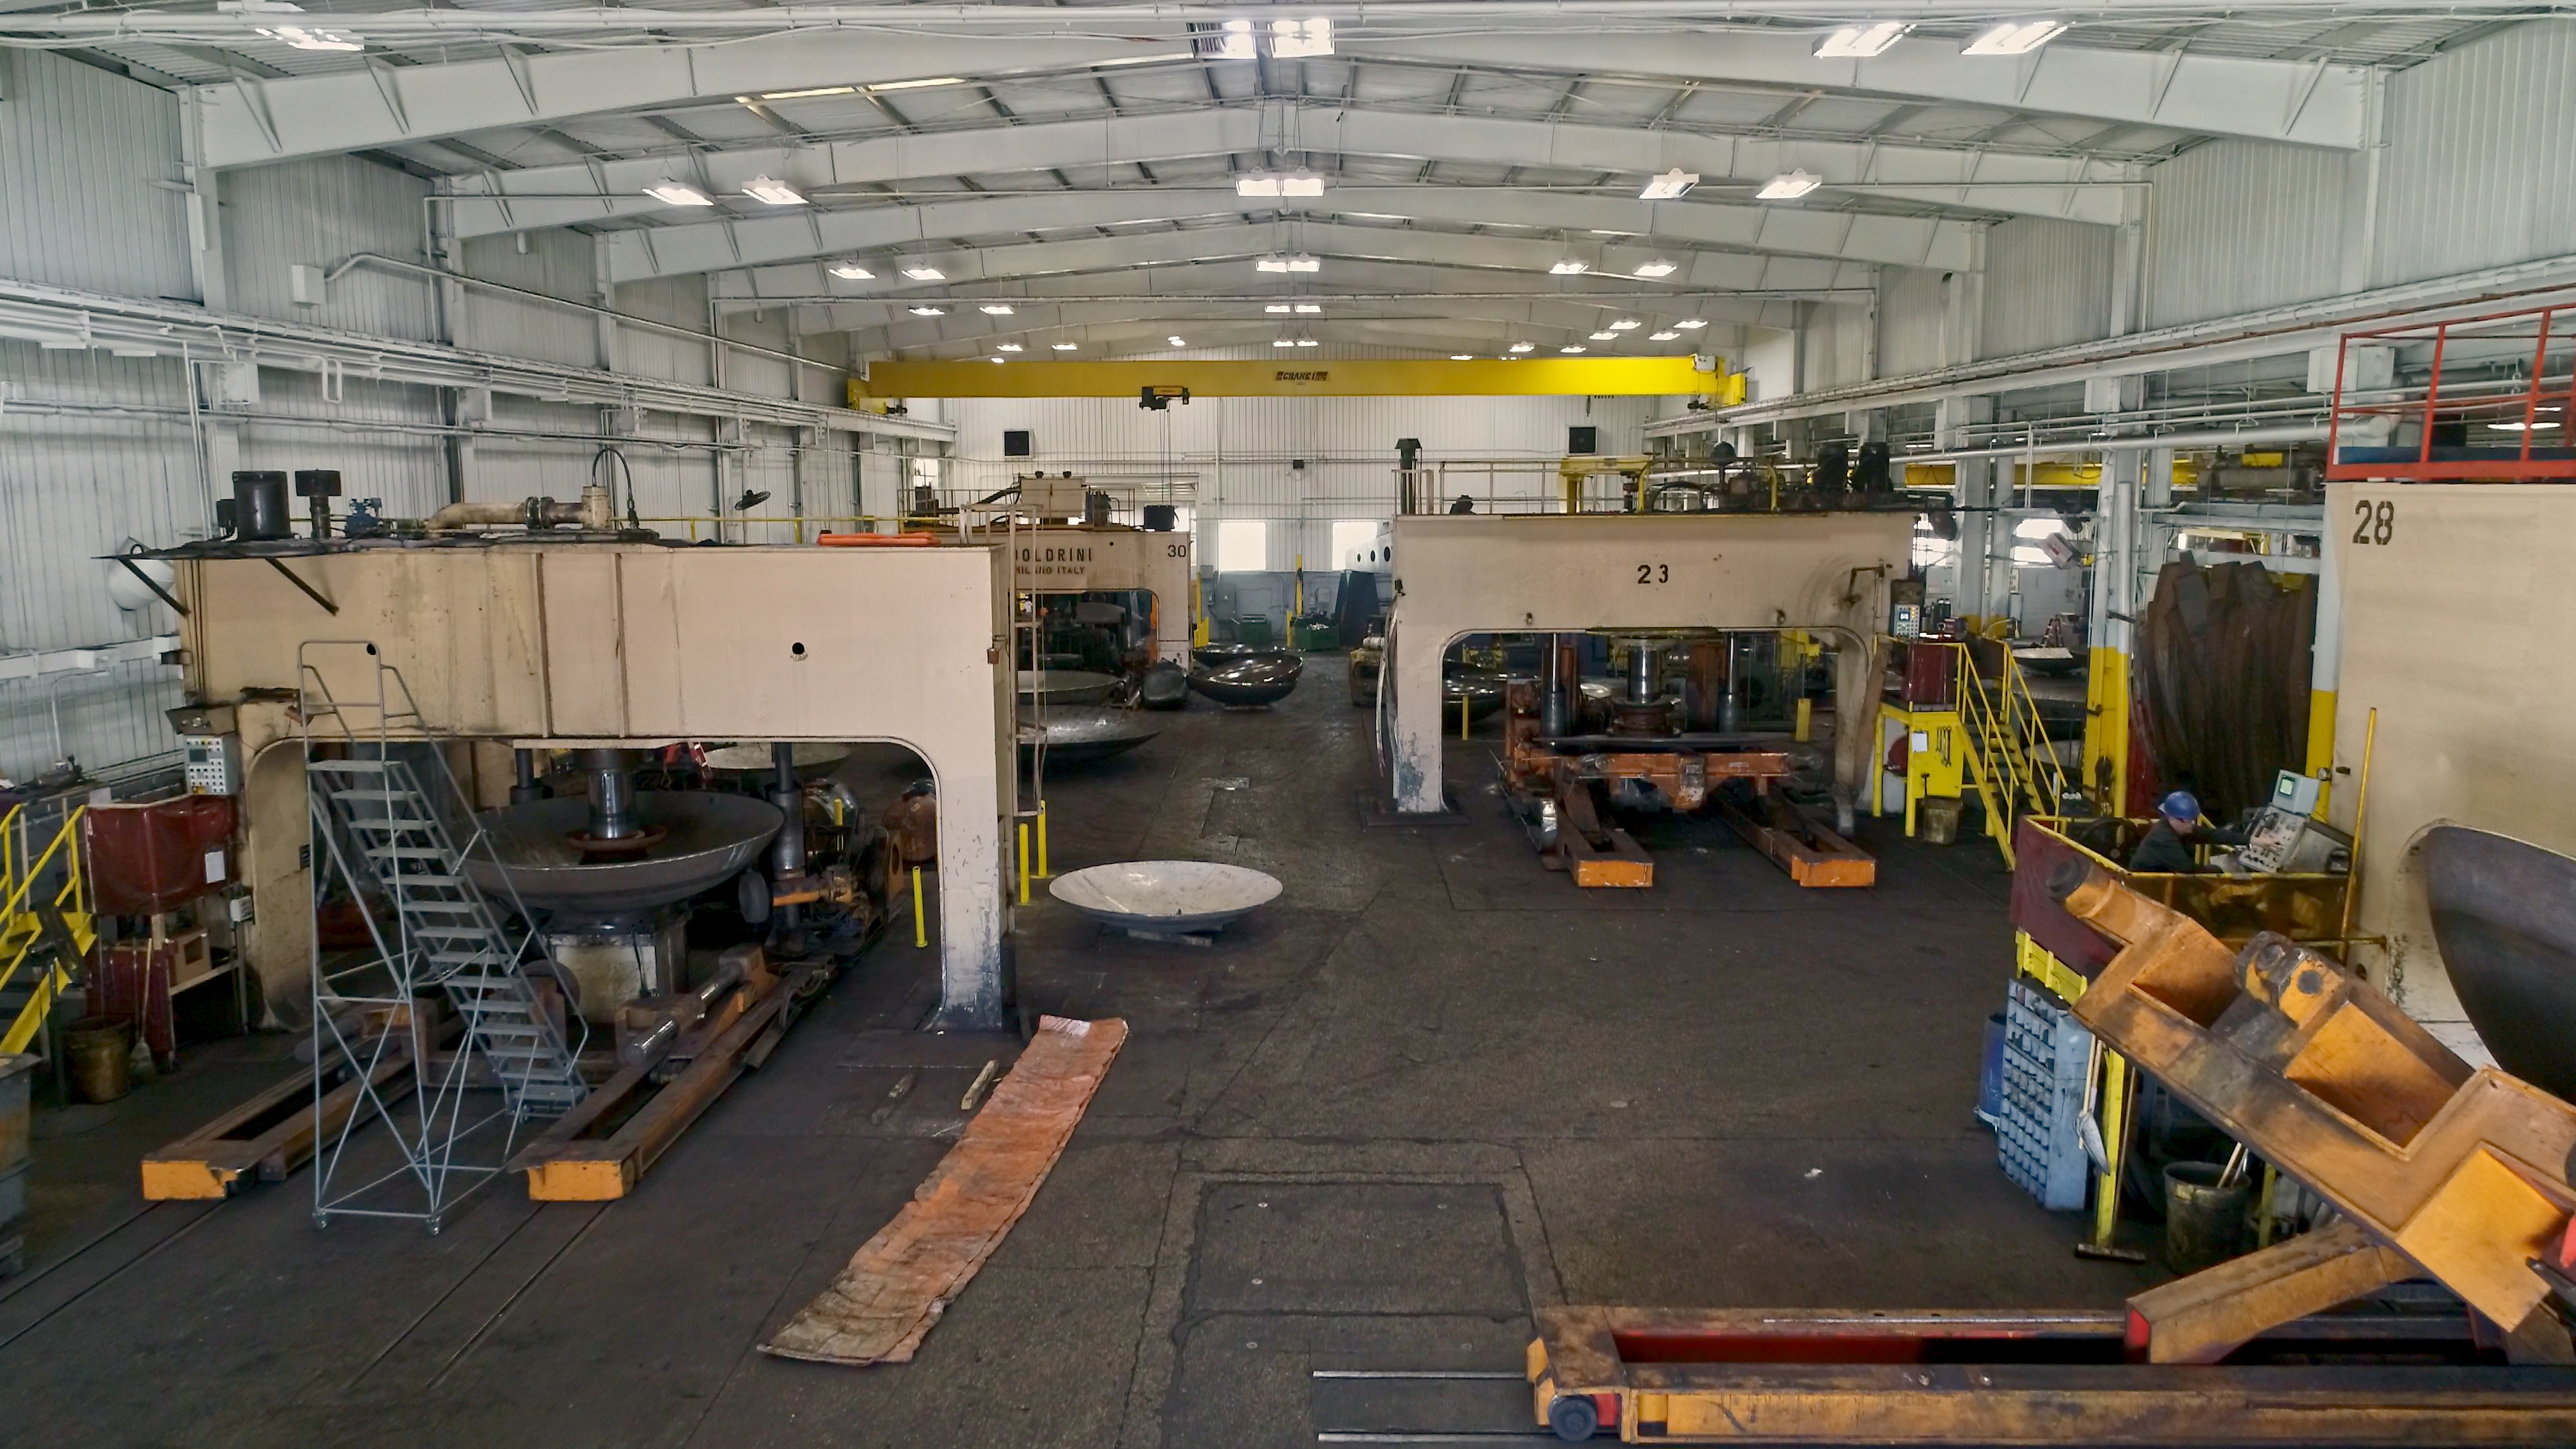 Wide-angle of the inside of a tank and vessel heads shop.